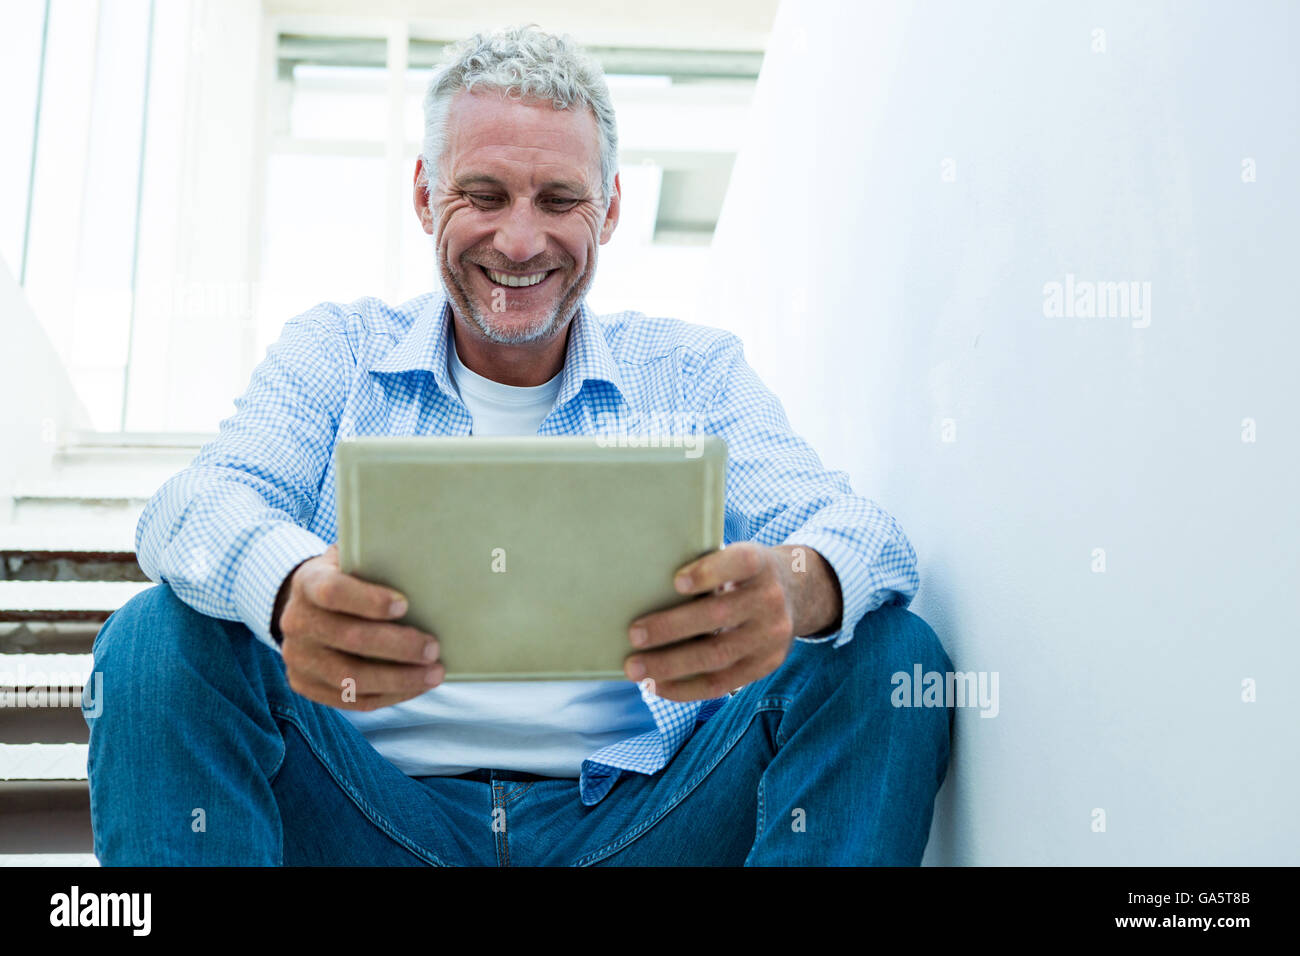 Smiling mature man holding tablet while sitting on steps Stock Photo